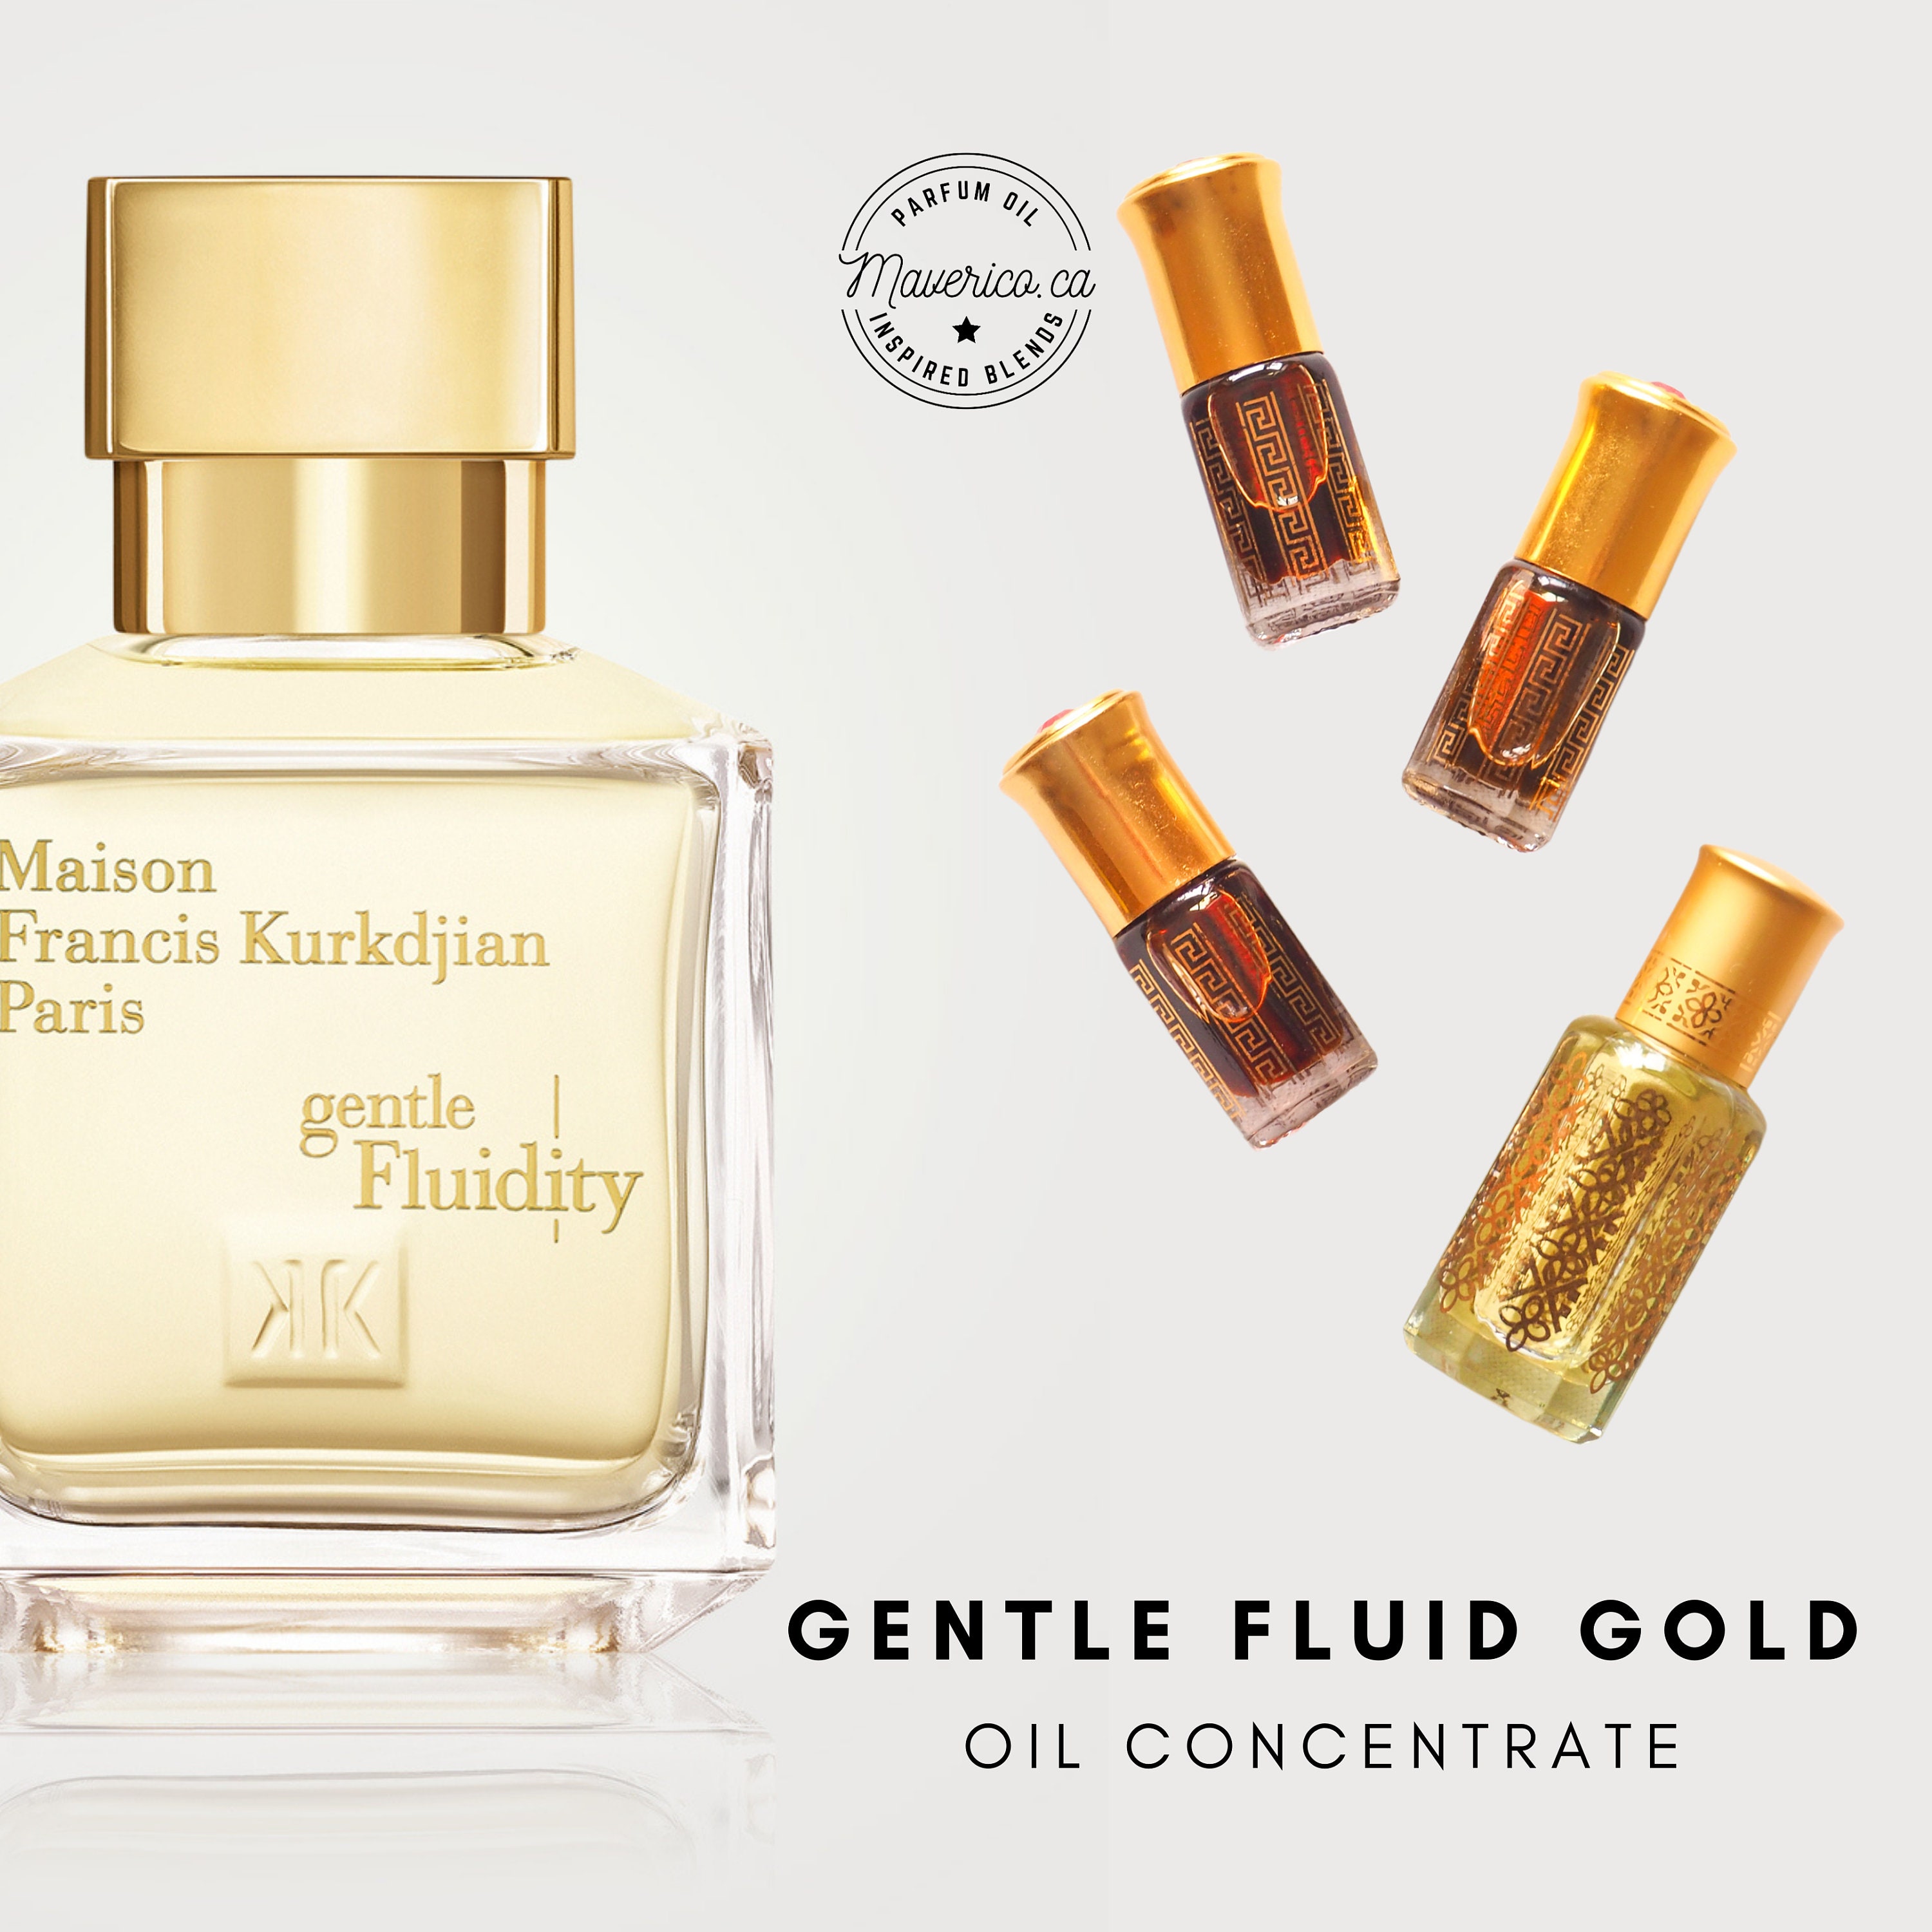 Our Impression of Gentle Fluidity Gold by Maison Francis Kurkdjian Perfume  Oil by generic perfumes Niche Perfume Oil for Unisex